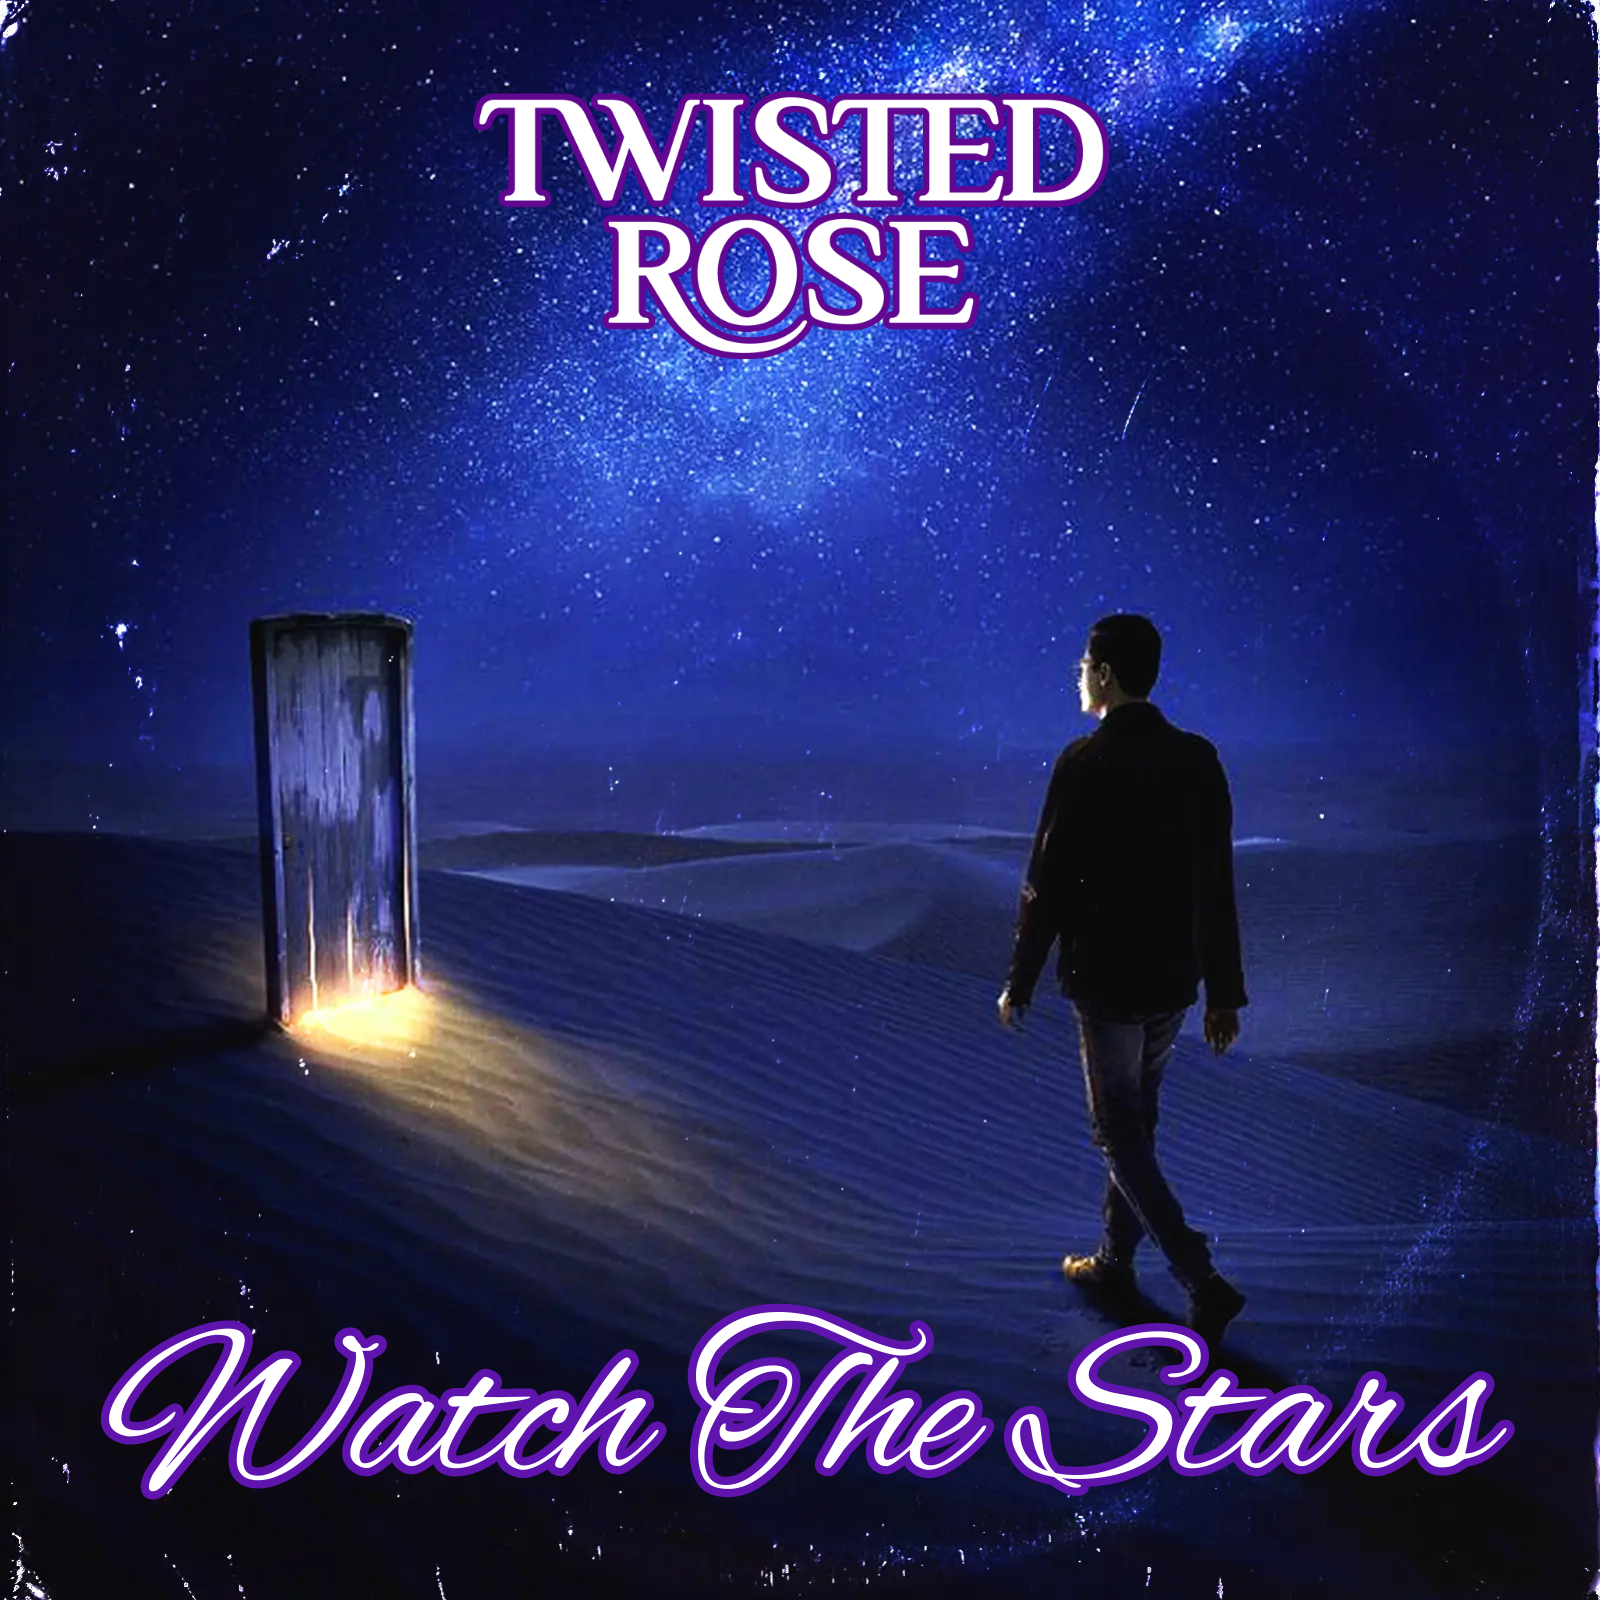 LISTEN: “Watch the Stars” by Twisted Rose